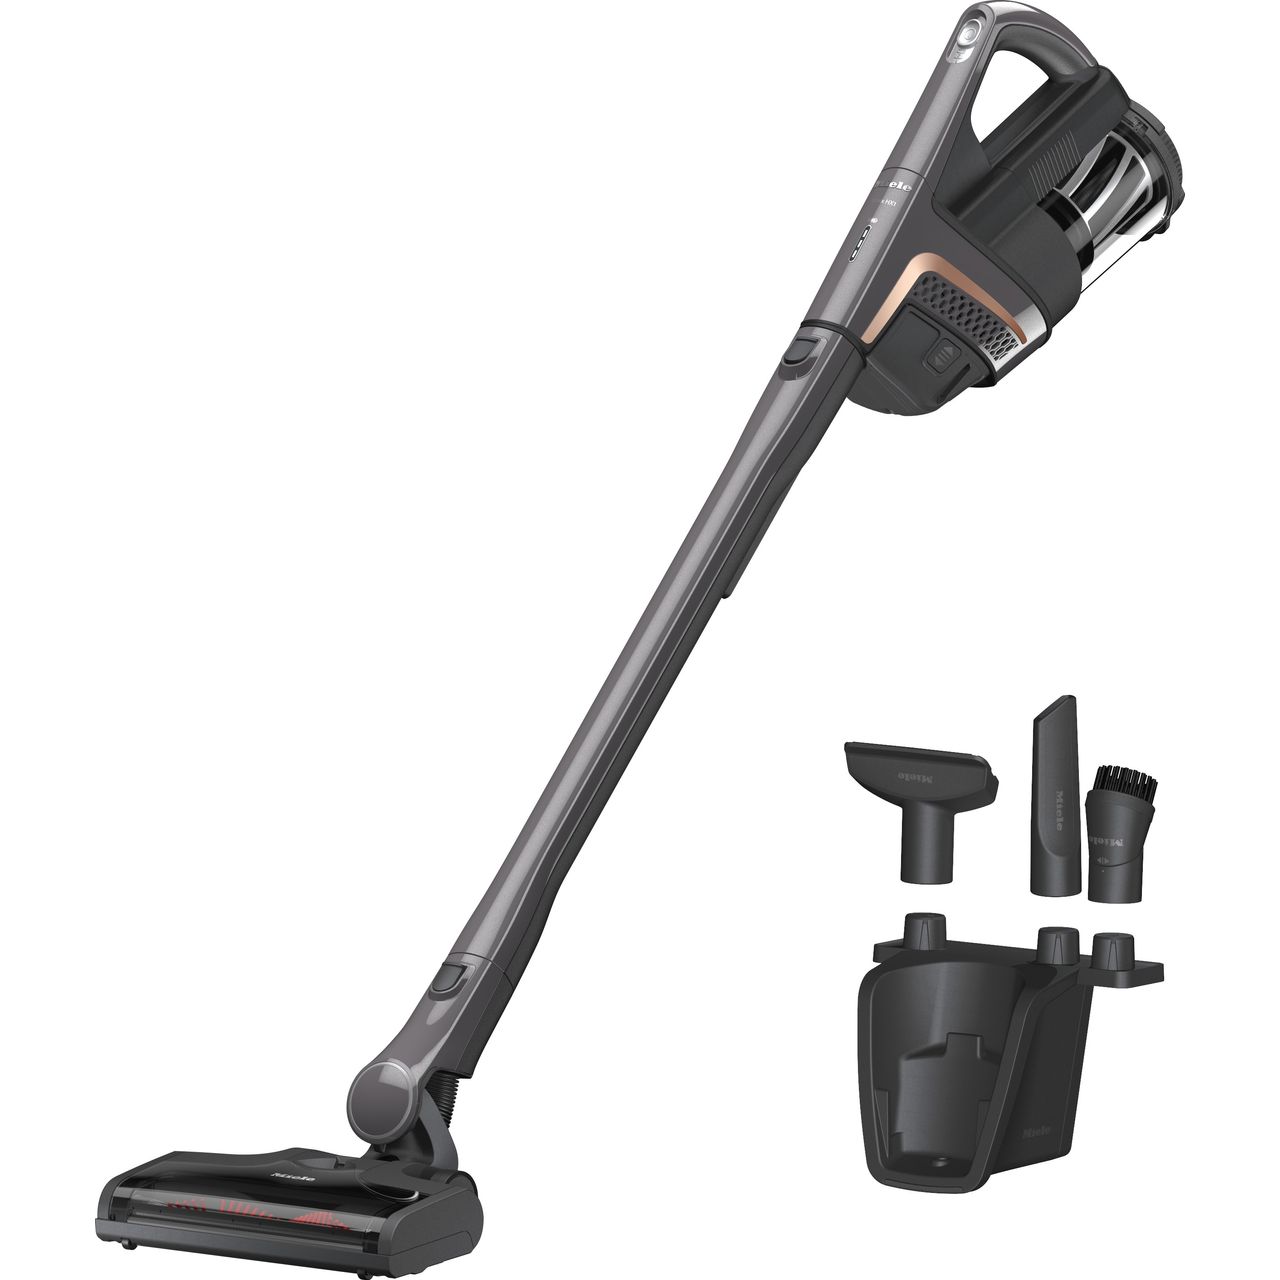 Miele Triflex HX1 Cordless Vacuum Cleaner with up to 60 Minutes Run Time Review